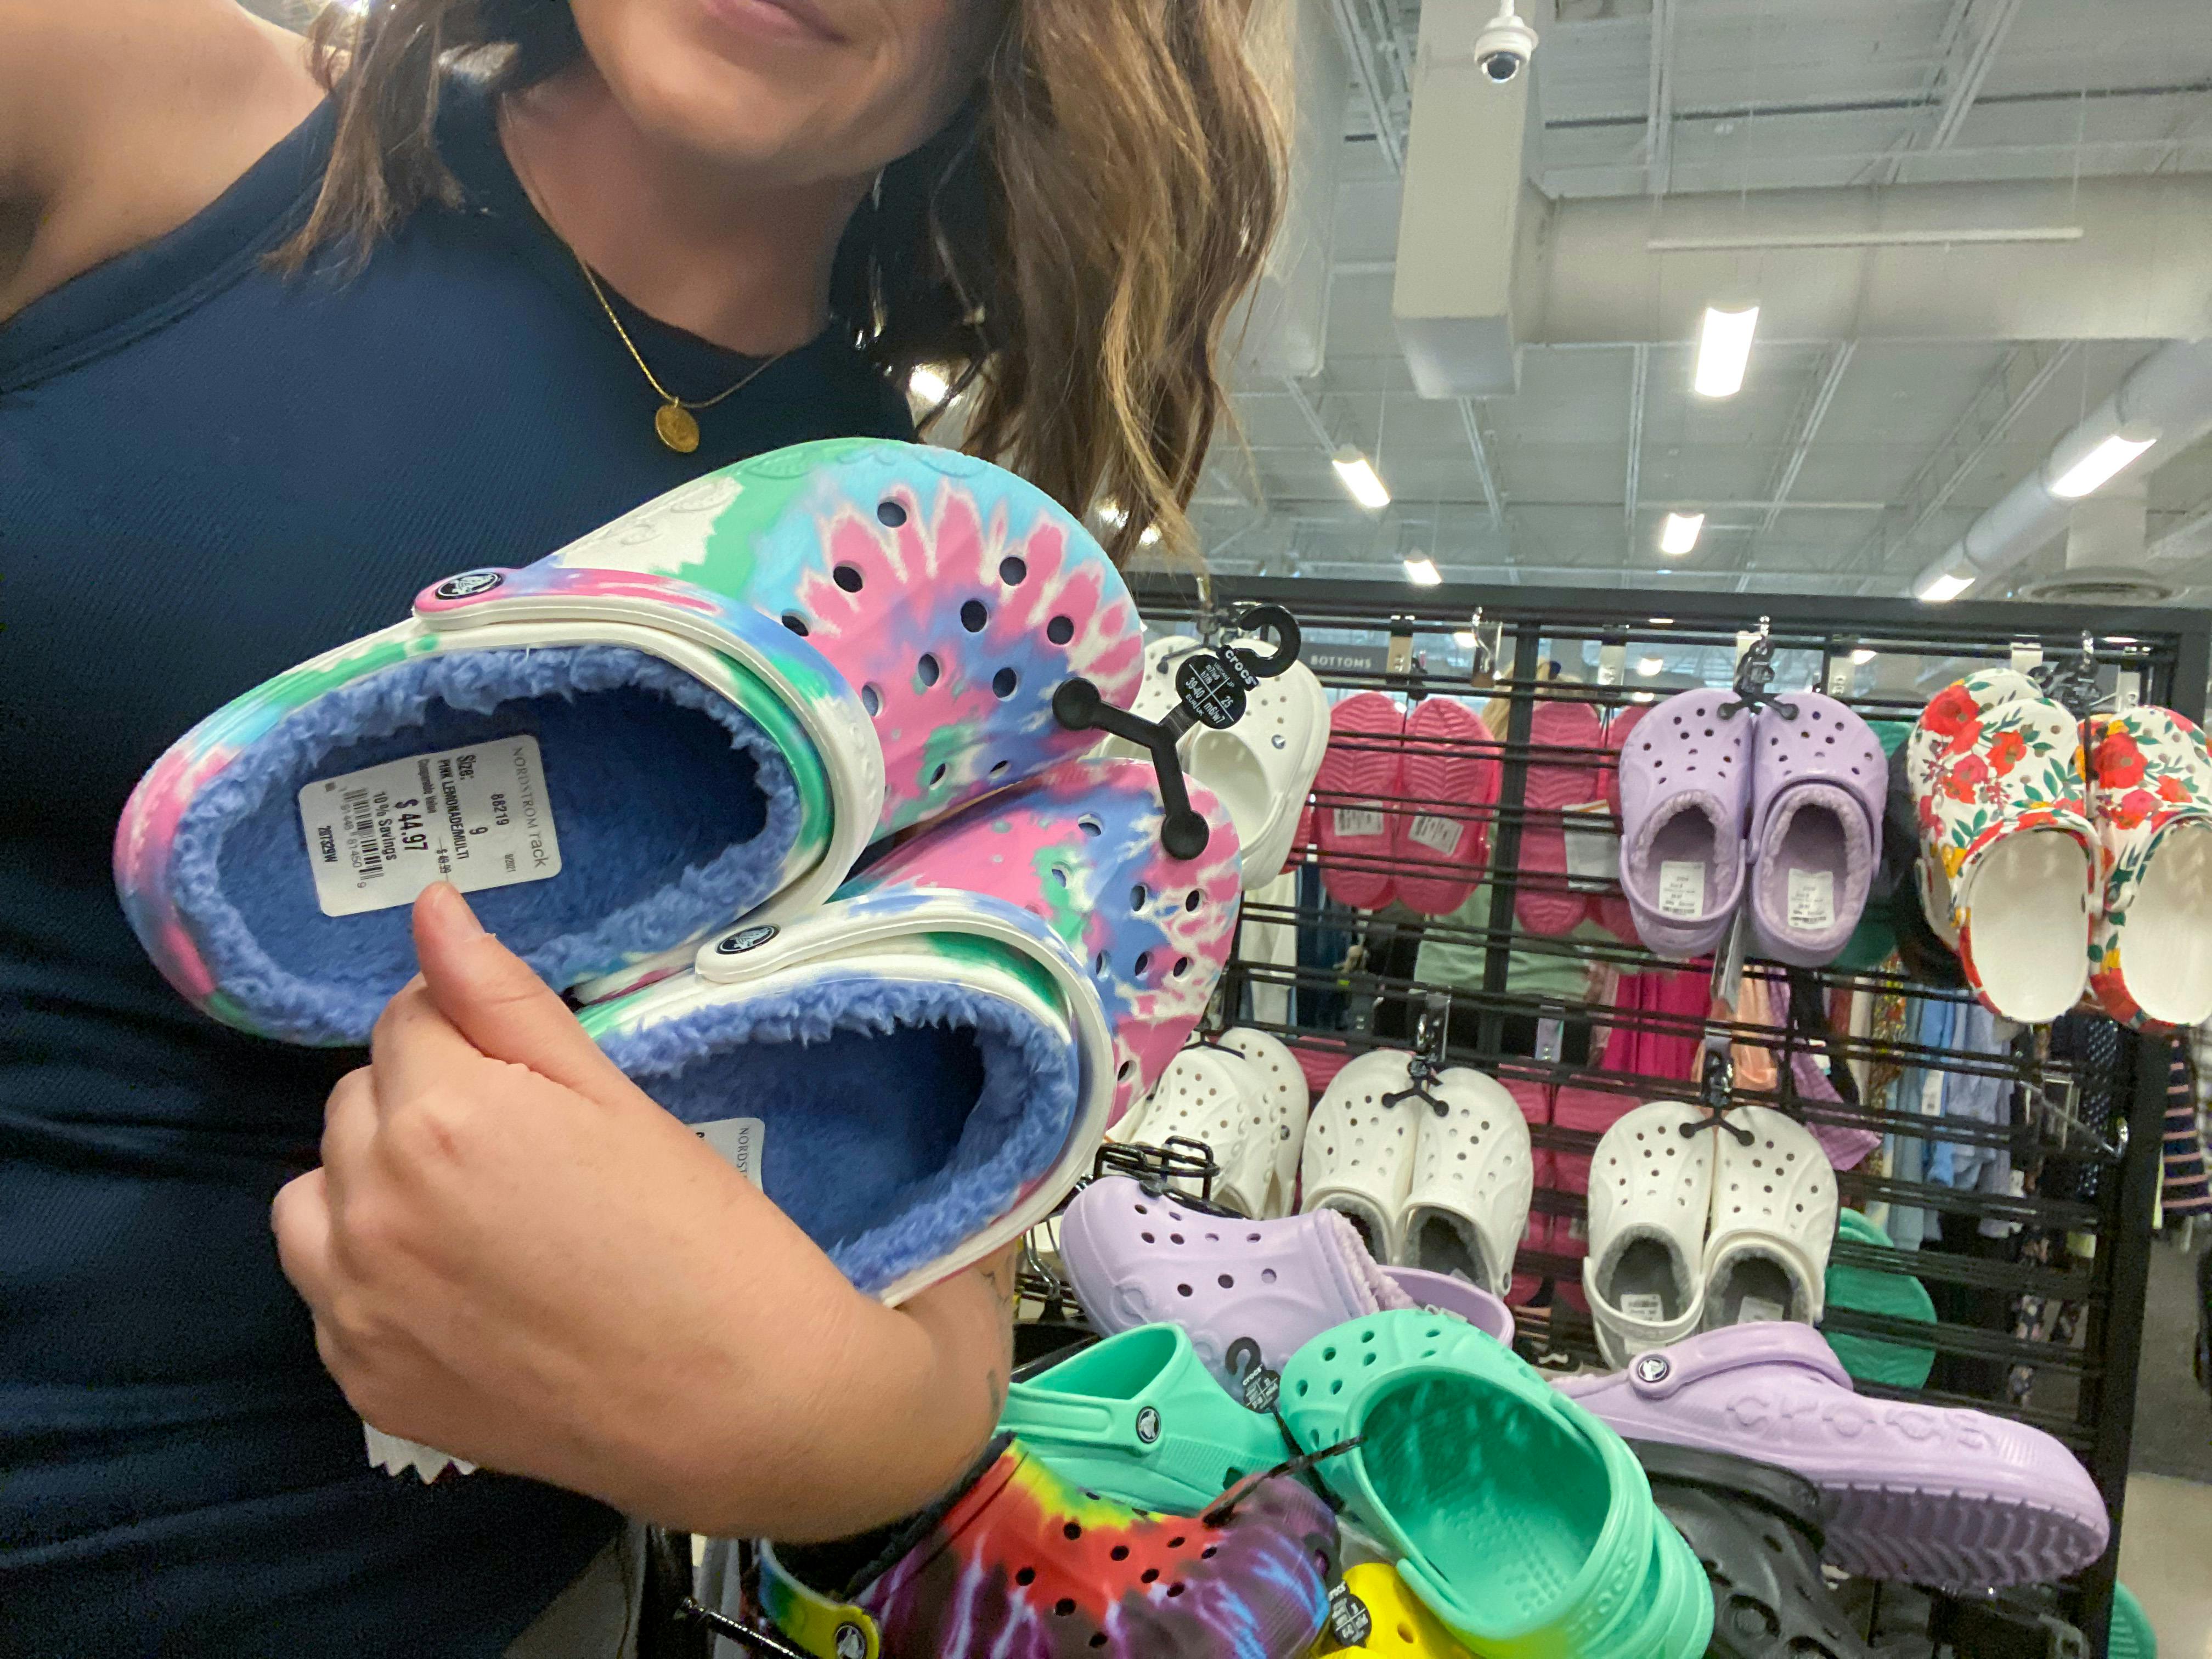 A woman holding a pair of Crocs in front of a Croc display at a shoe store.